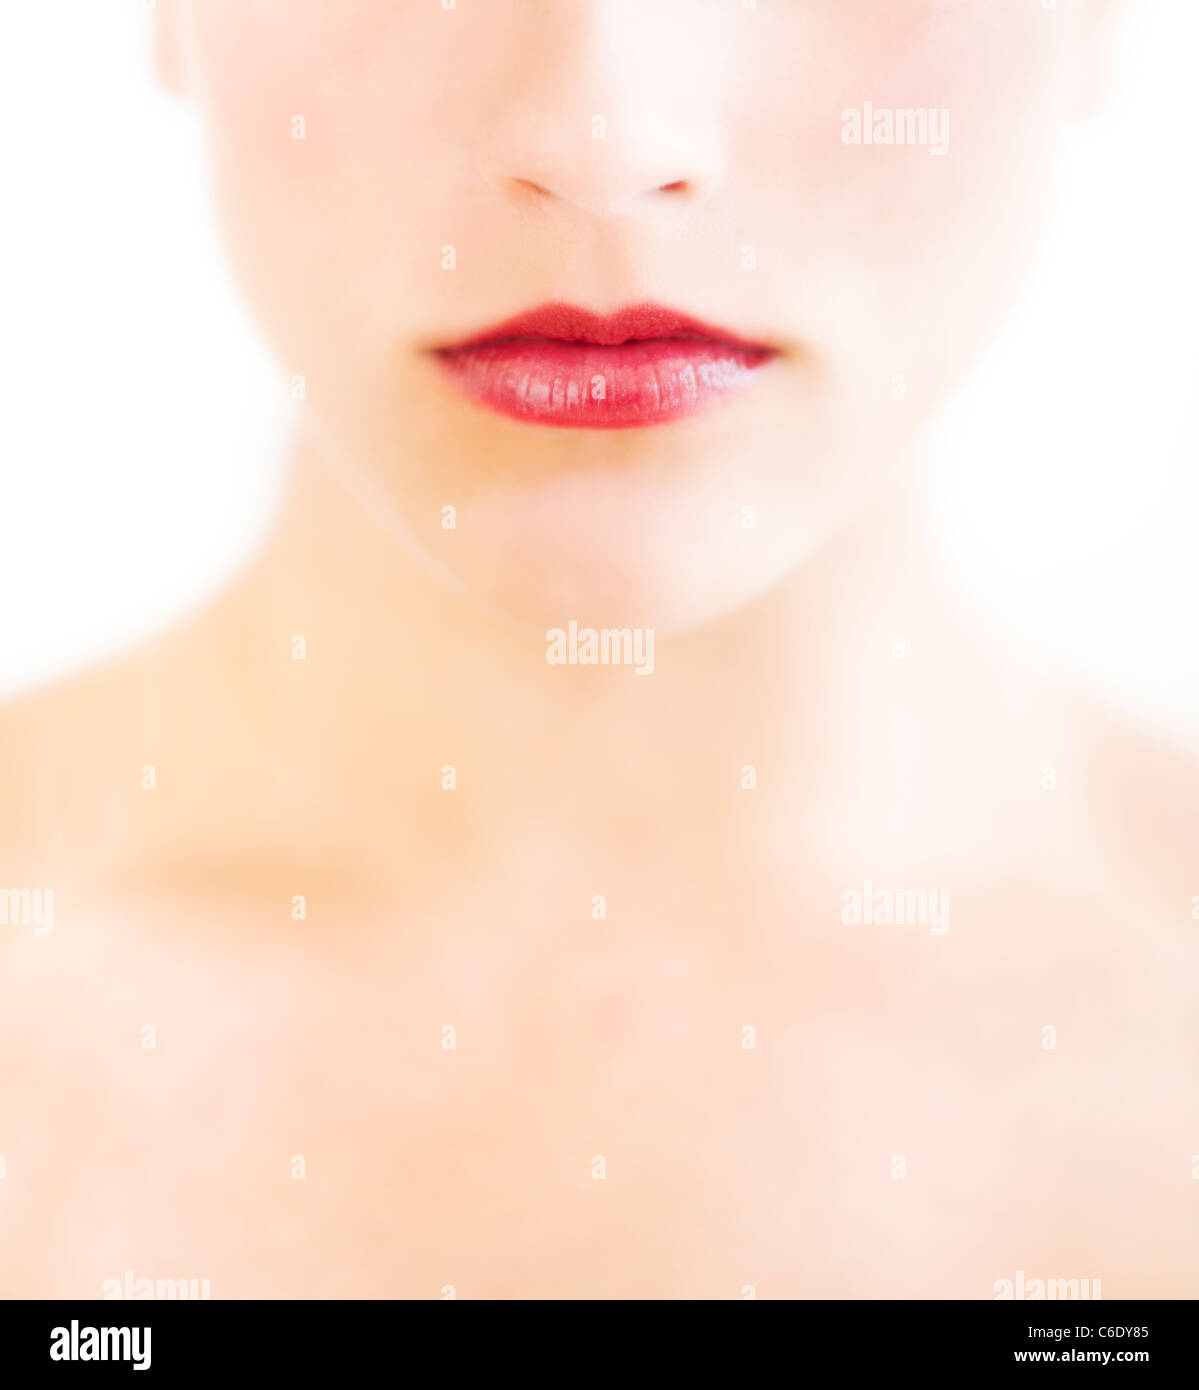 Young woman with red lips and pale complexion Stock Photo